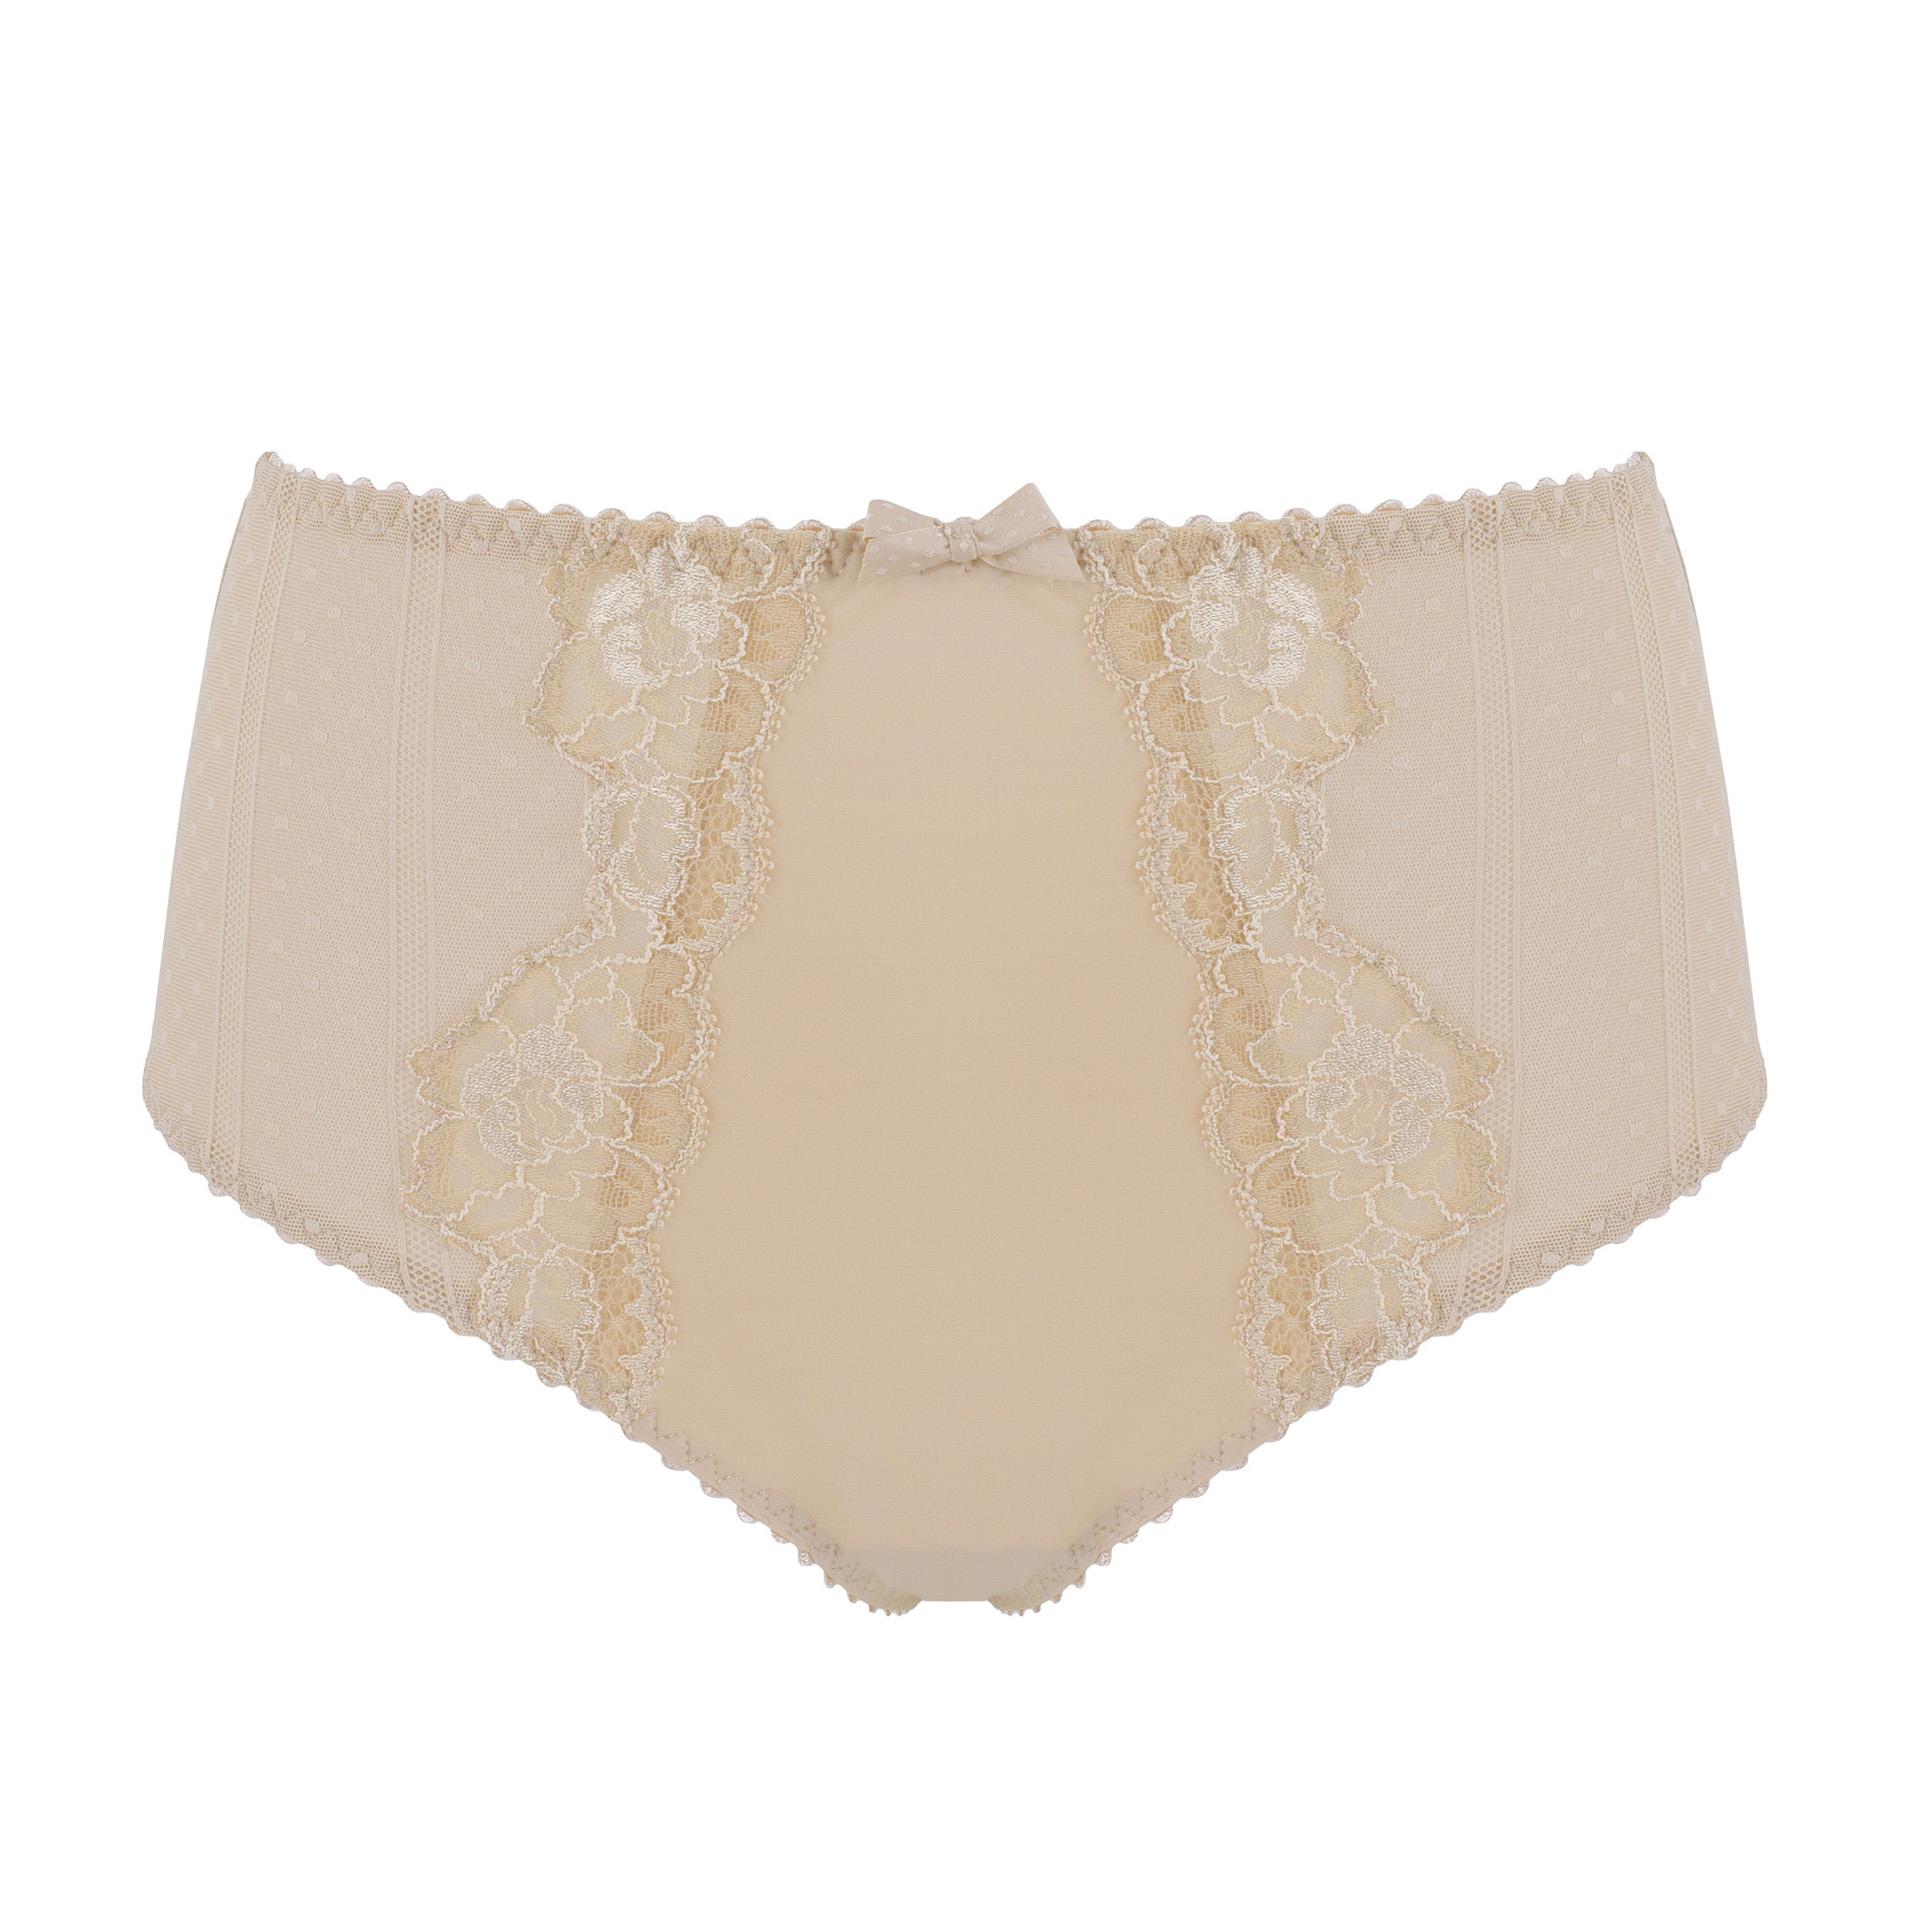 PrimaDonna COUTURE natural shapewear high briefs